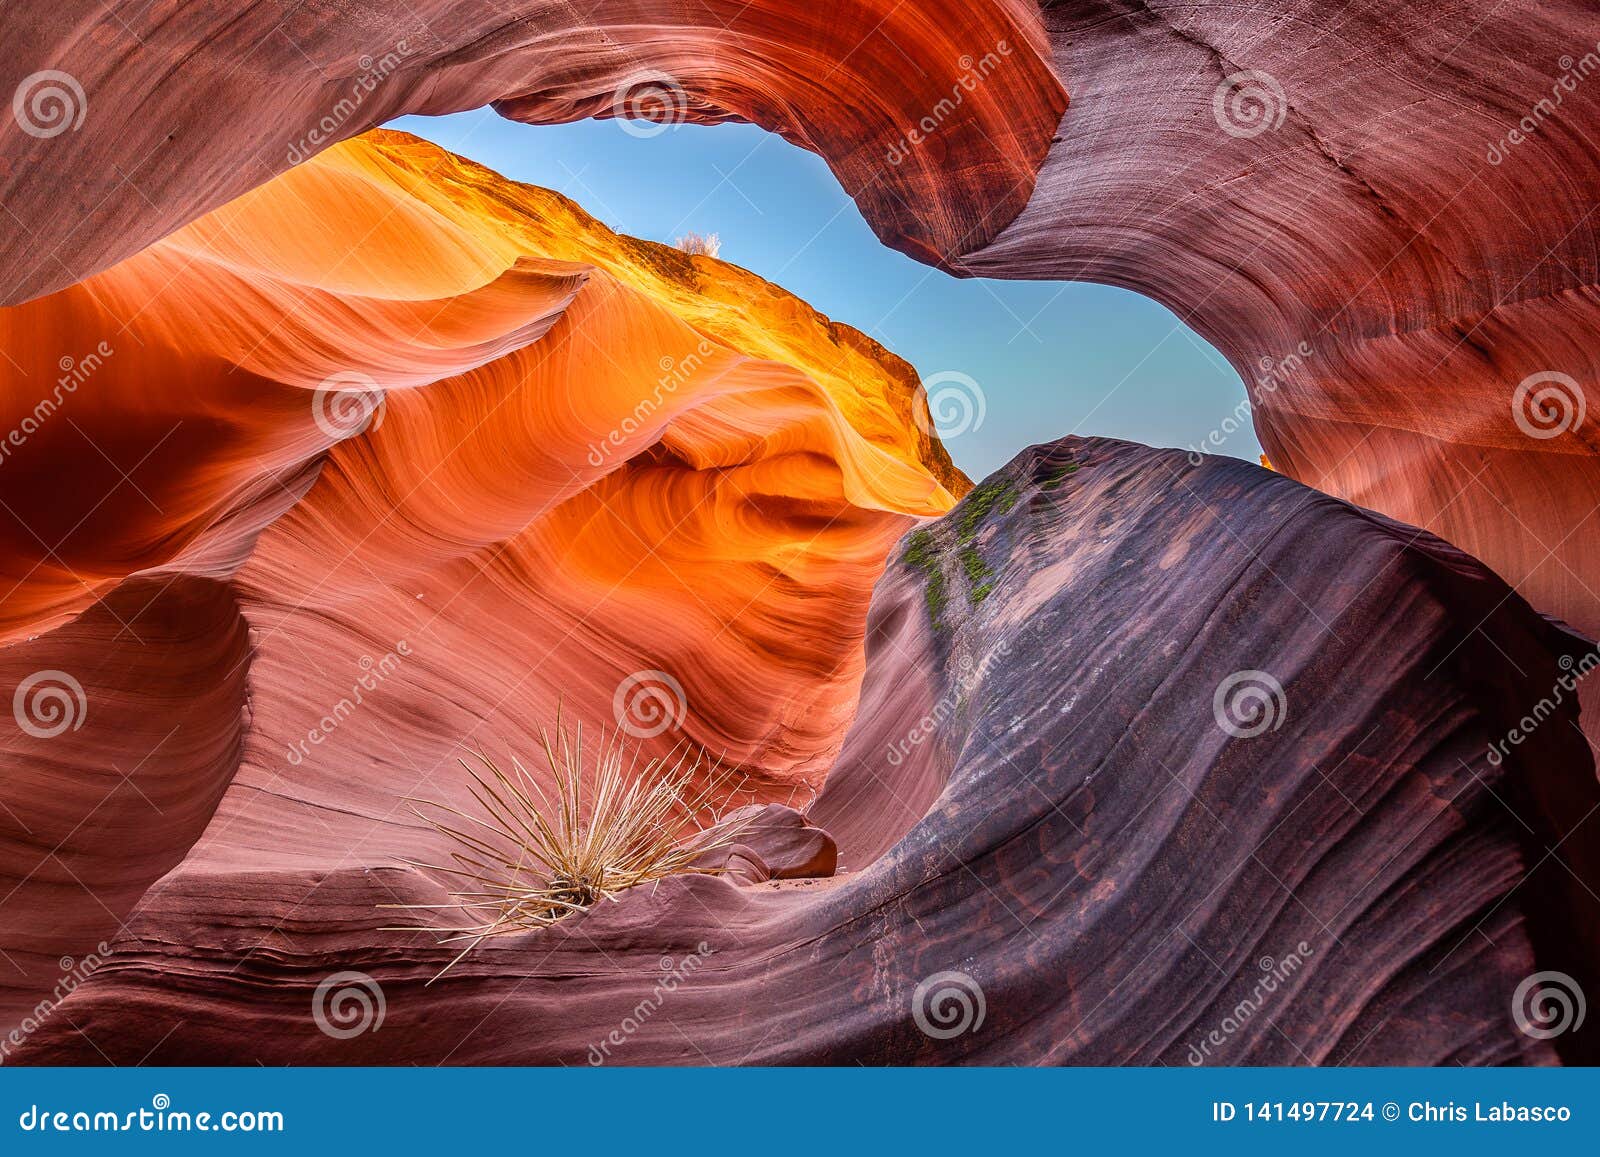 the intricate canyons of antelope canyon.